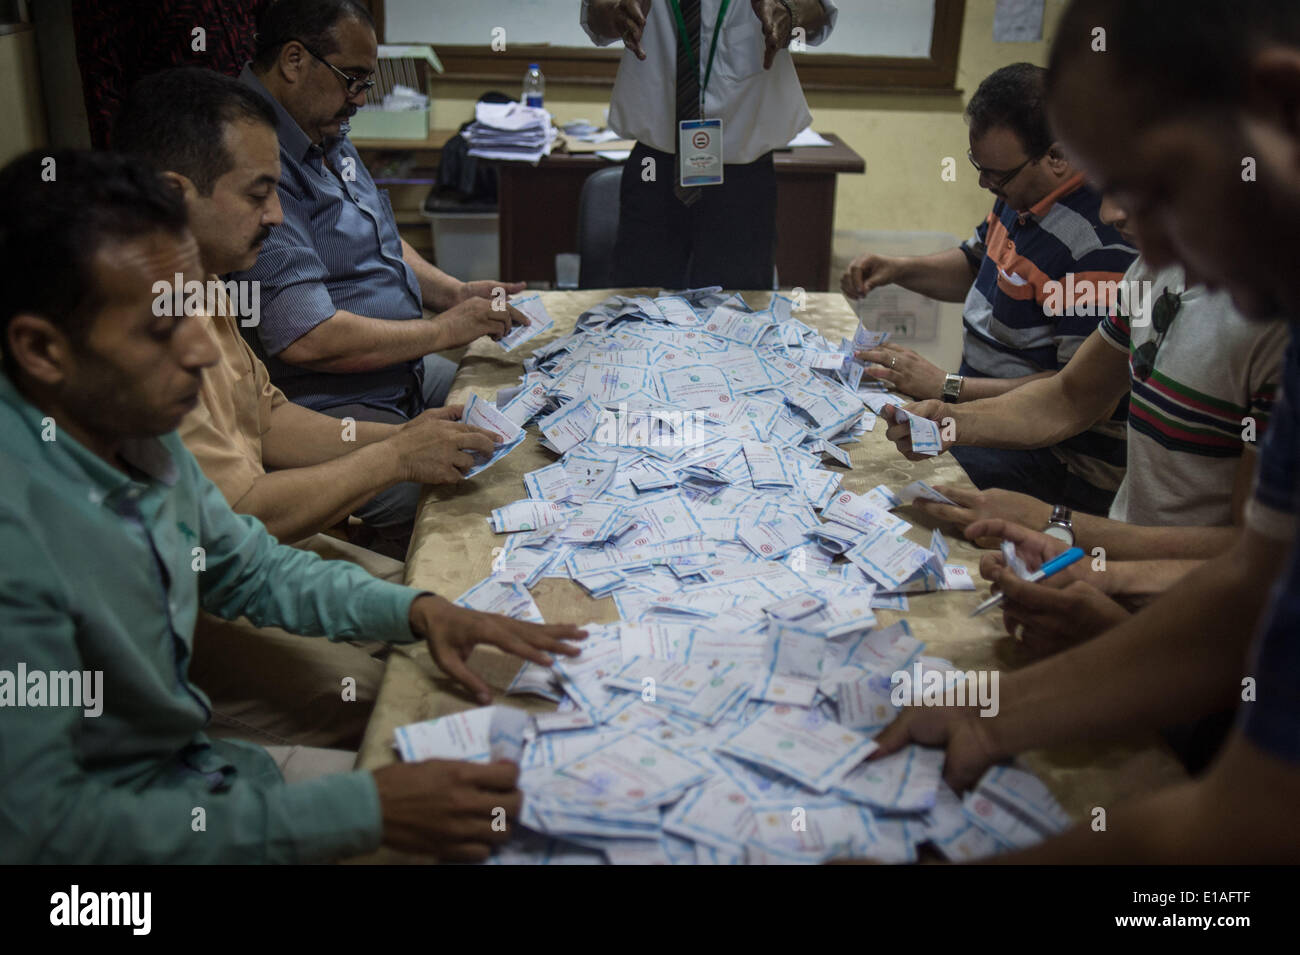 Cairo, Egypt. 28th May, 2014. Egyptian electoral workers arrange and count ballots at a polling station after the closing time of voting in Cairo, Egypt, May 28, 2014. Egypt's three-day presidential election came to an end on Wednesday. Credit:  Pan Chaoyue/Xinhua/Alamy Live News Stock Photo